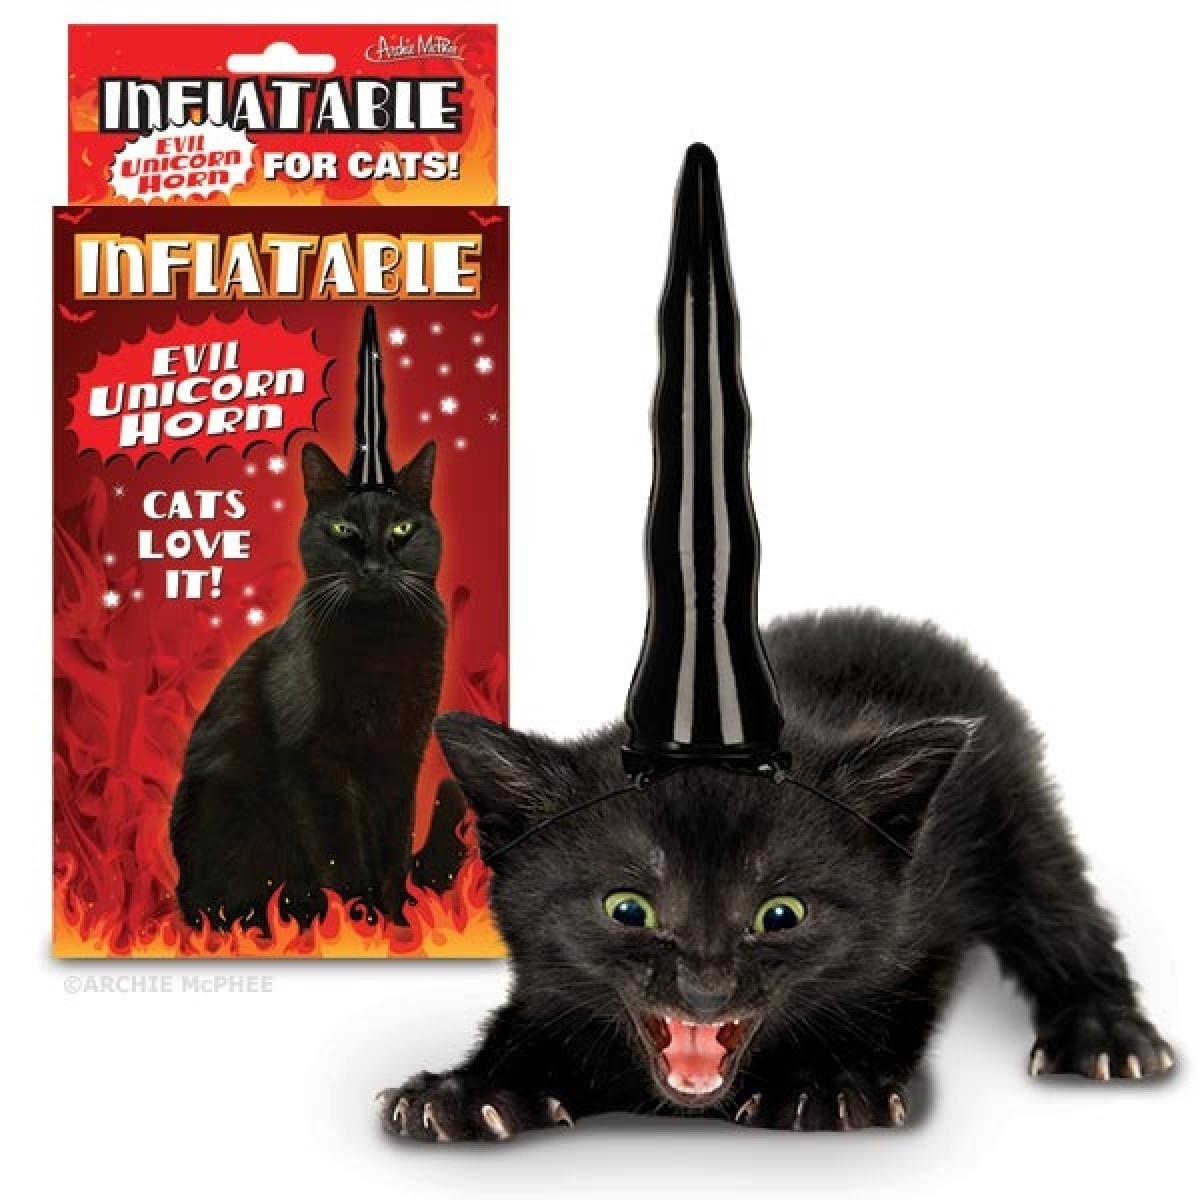 inflatable evil unicorn horn for cats - Anda Metri Thejatarie unicorn For Cats! Evil Fiatarie Evil Unicorn Tore Cats Love Archie Mephee